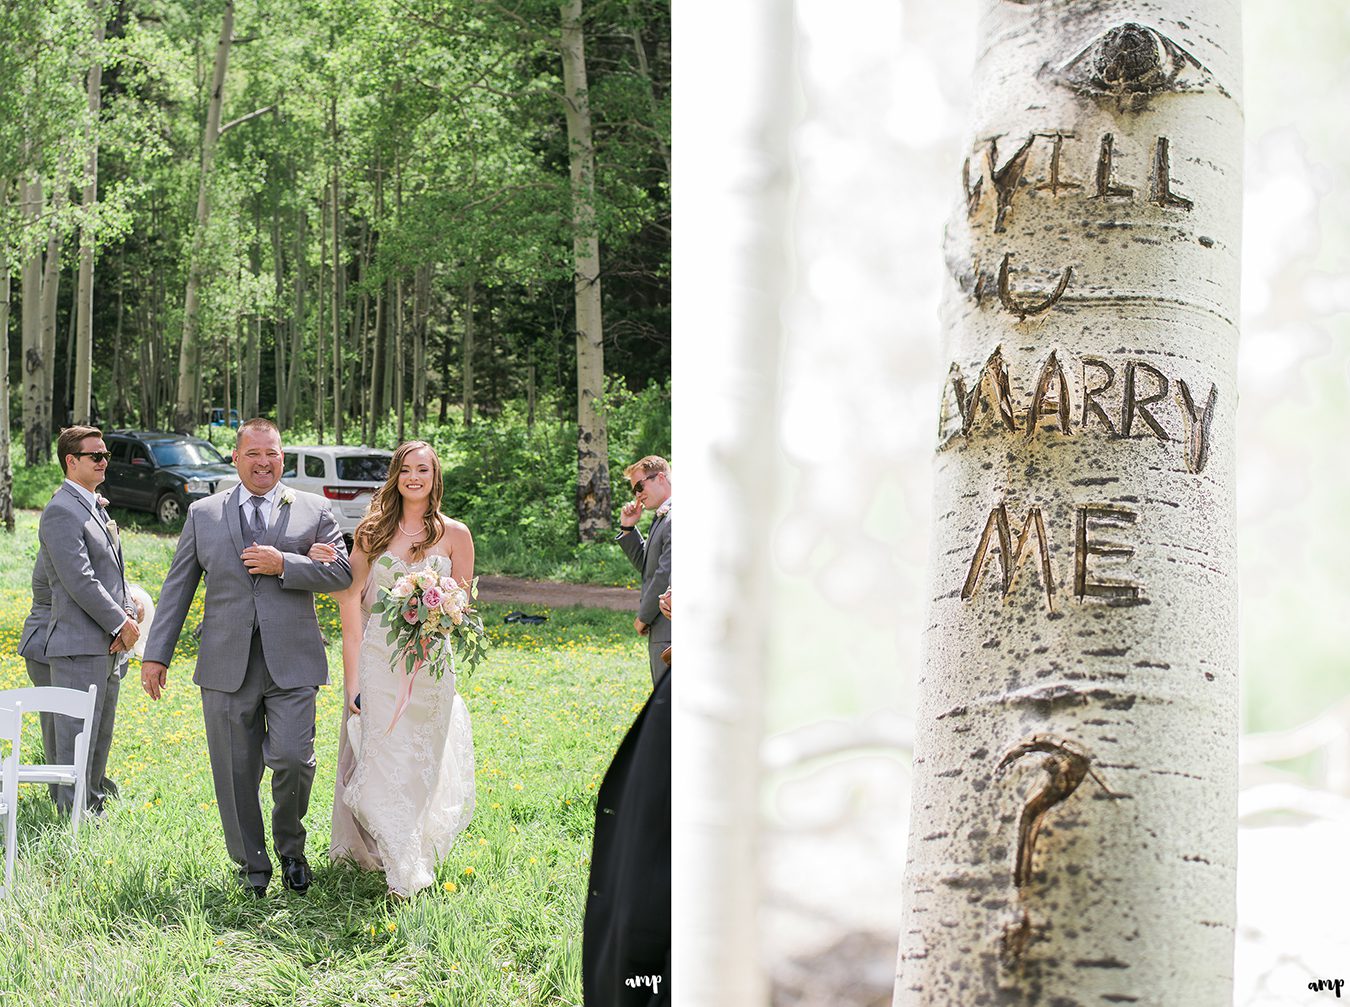 Will You Marry Me carved into an aspen tree